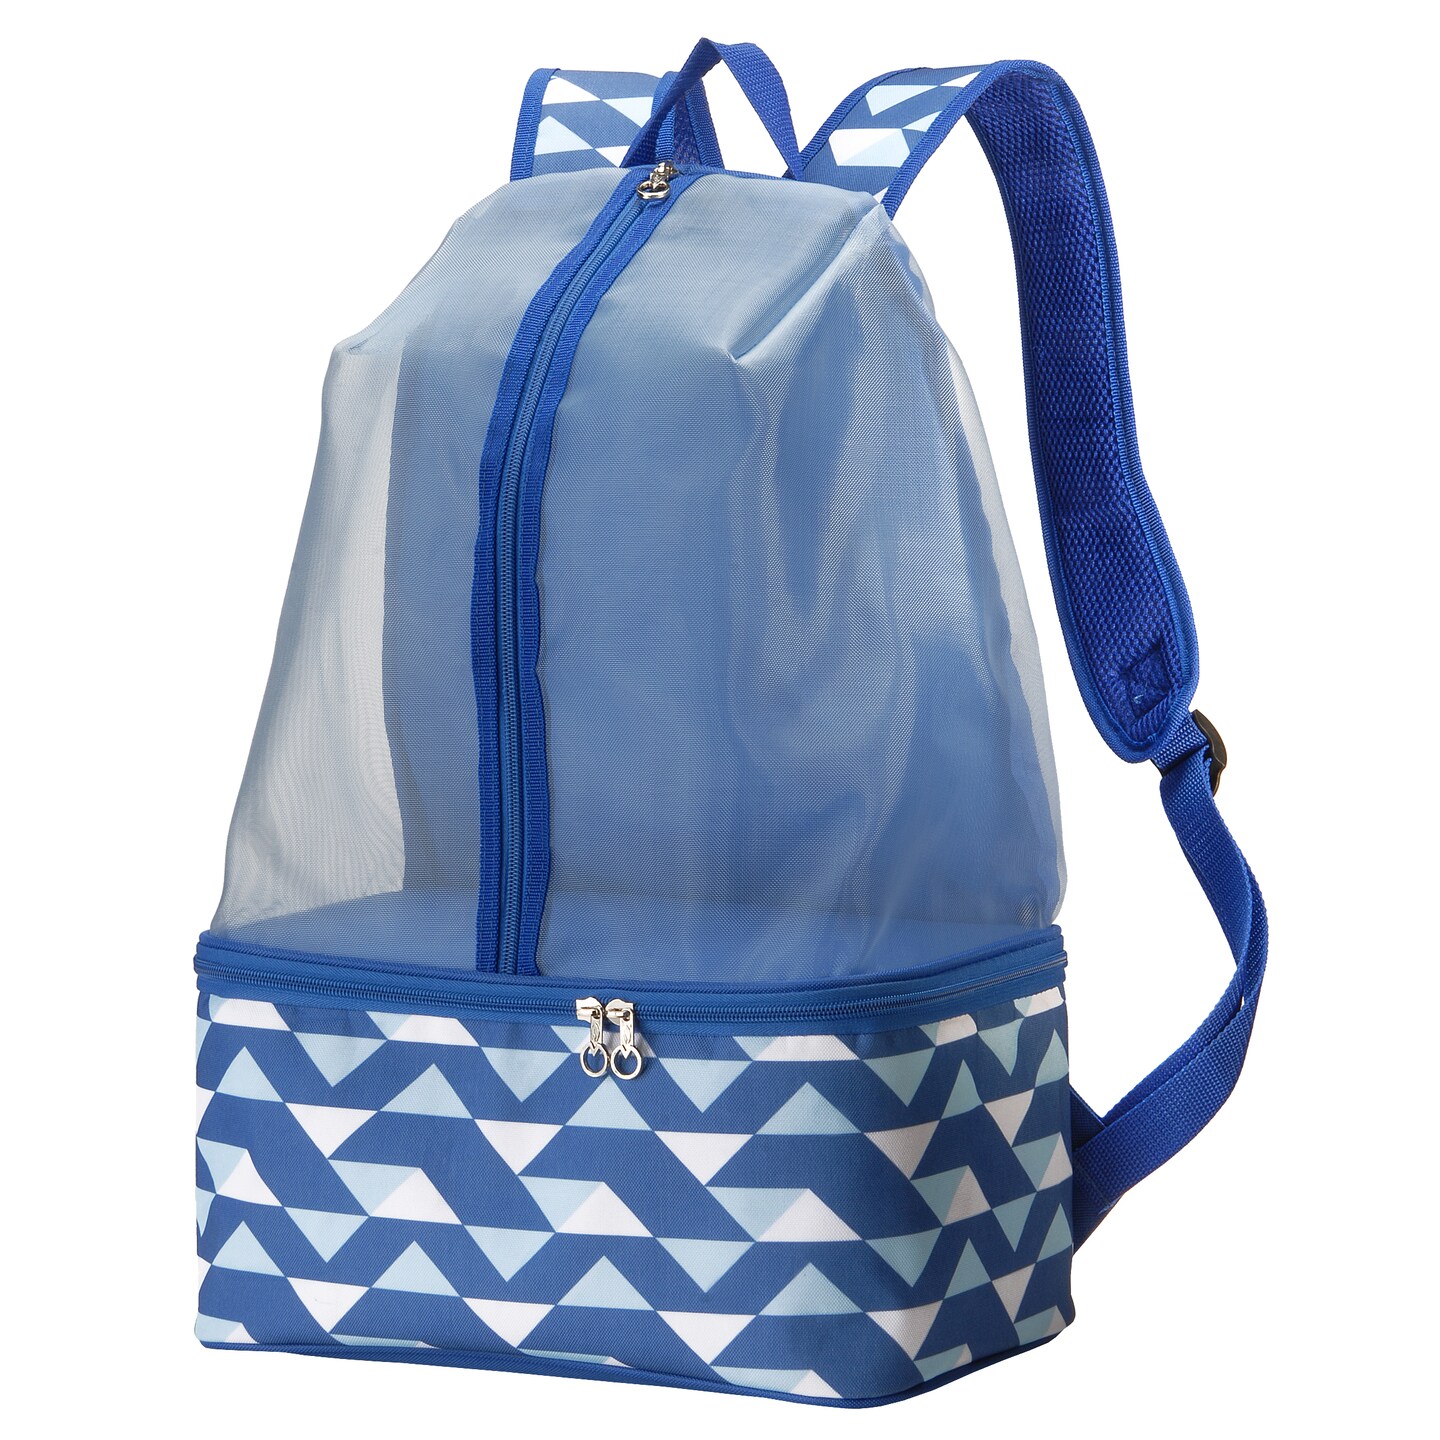 Backpack Style Cooler Beach Bag